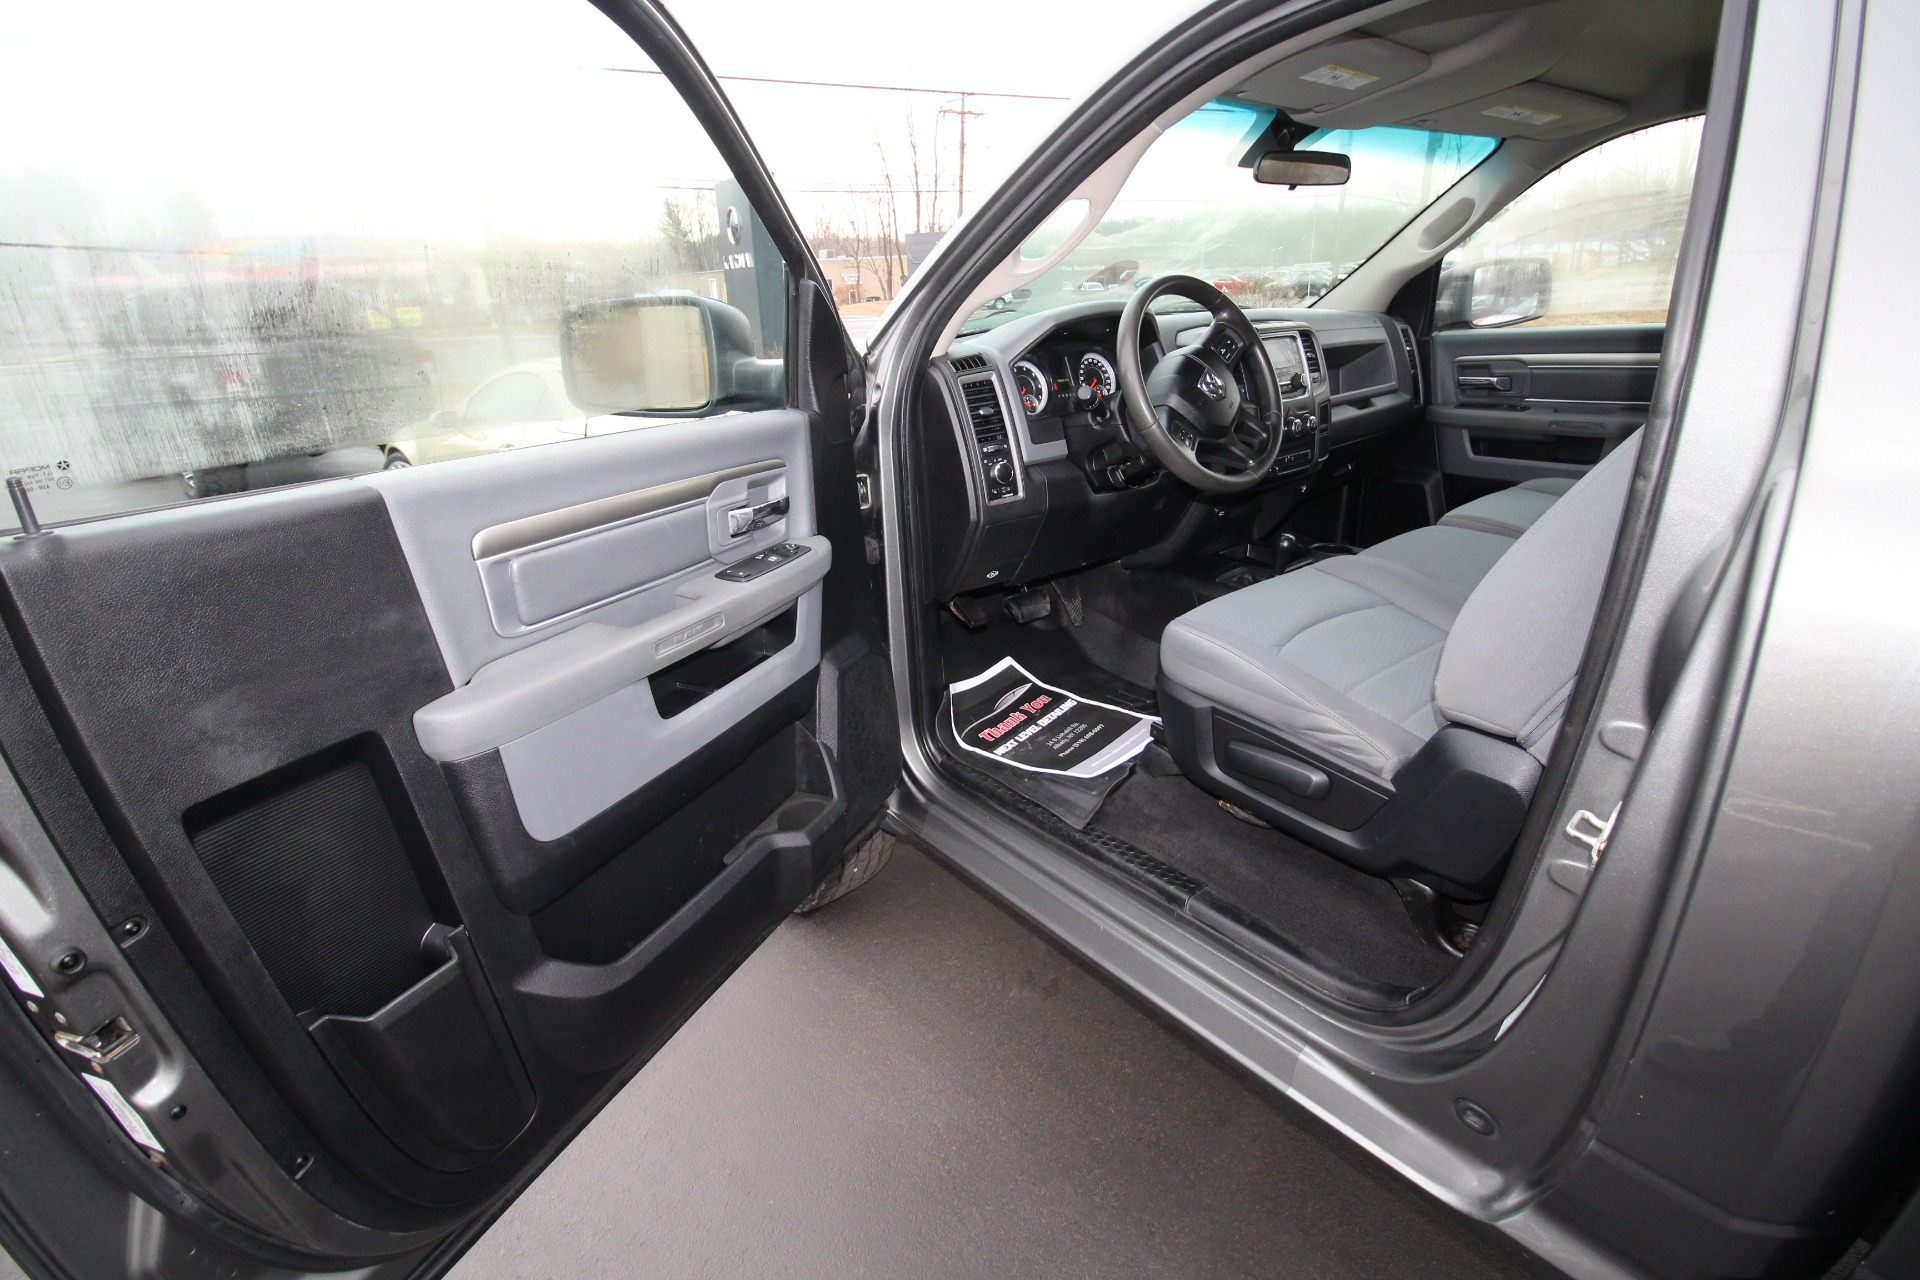 Used 2013 GREY RAM 2500 Tradesman 4WD RARE FIND REGULAR CAB SUPERB CONDITION LOW MILES | Albany, NY